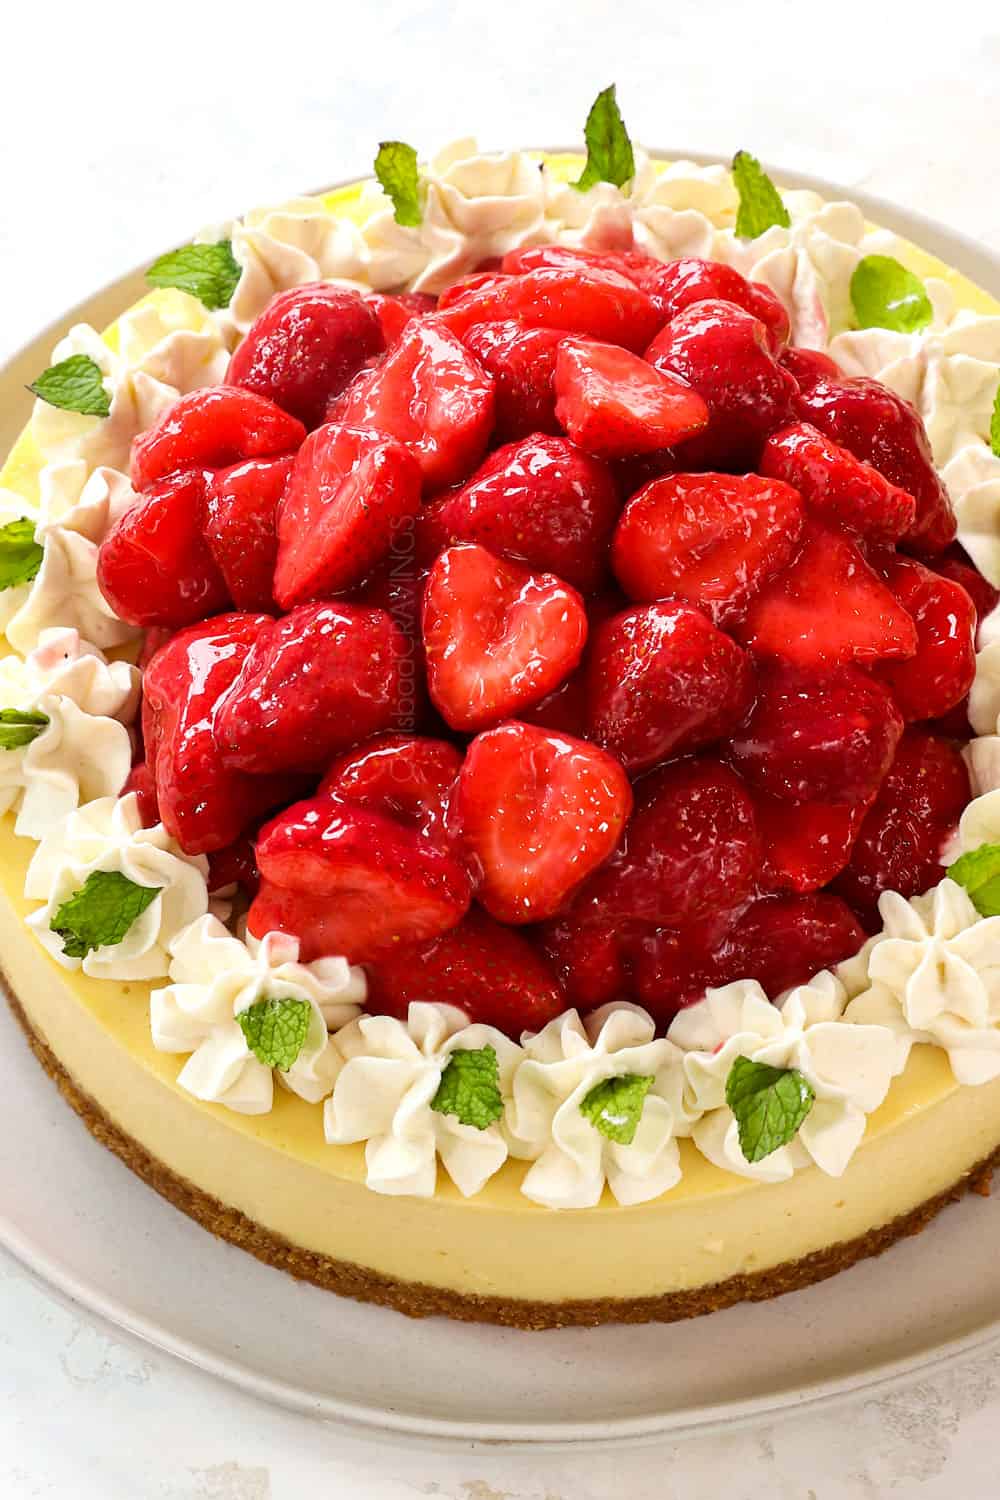 strawberry cheesecake with strawberry topping on to of the cheesecake